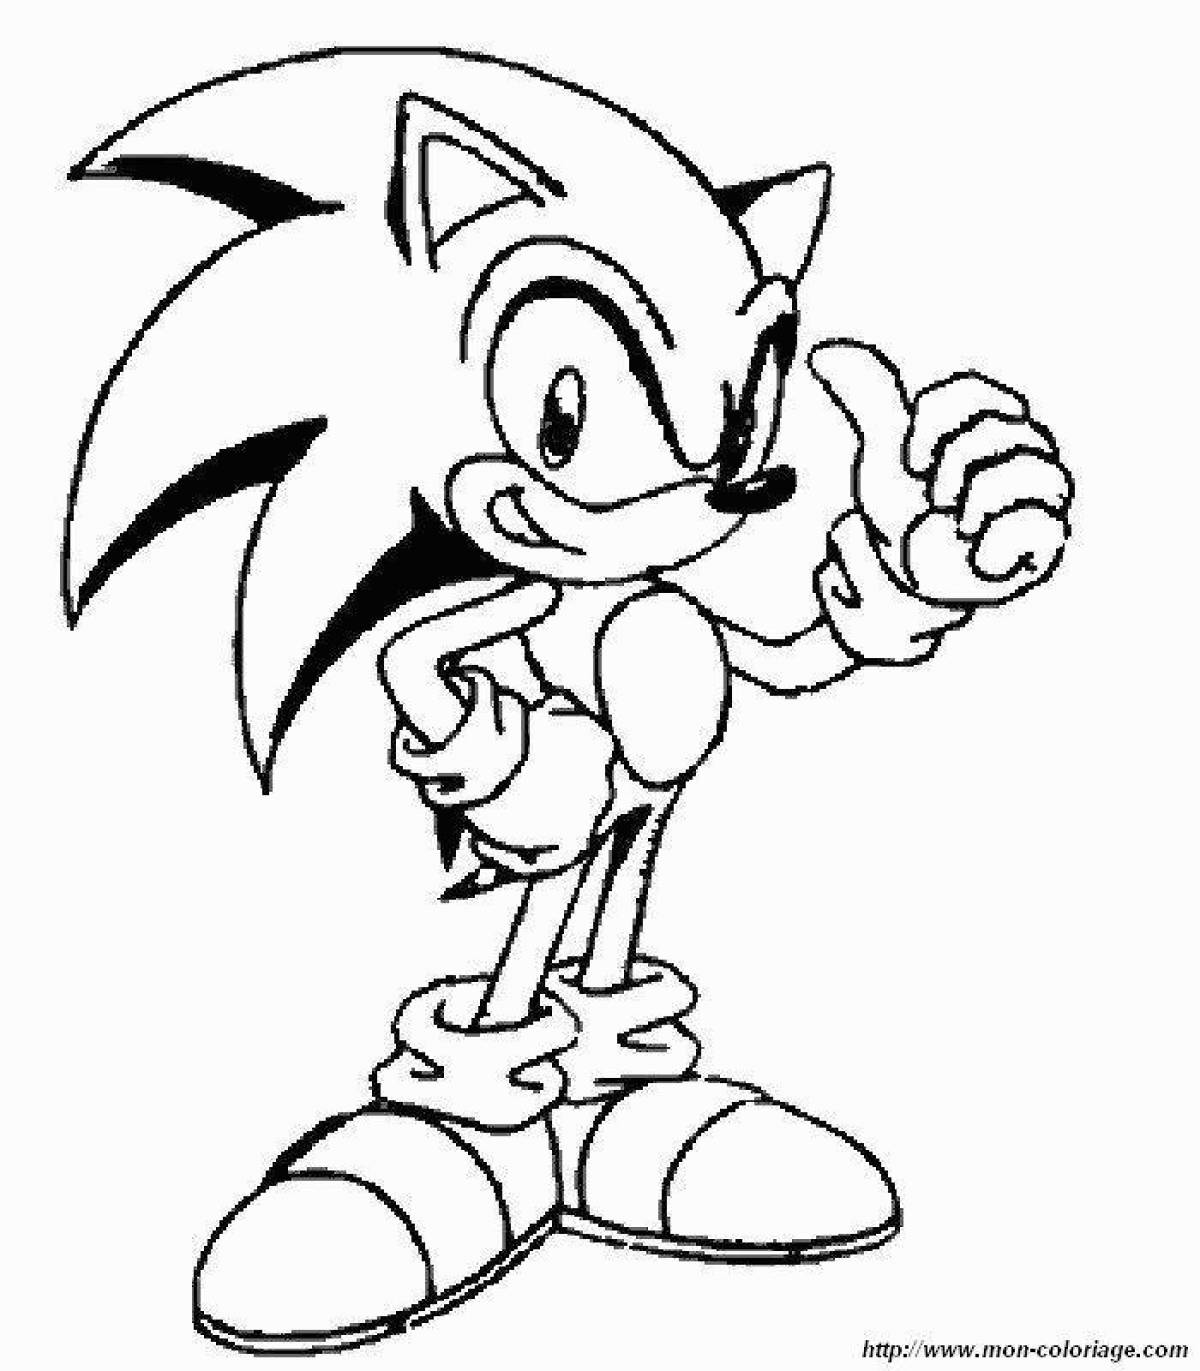 Intriguing black sonic coloring book